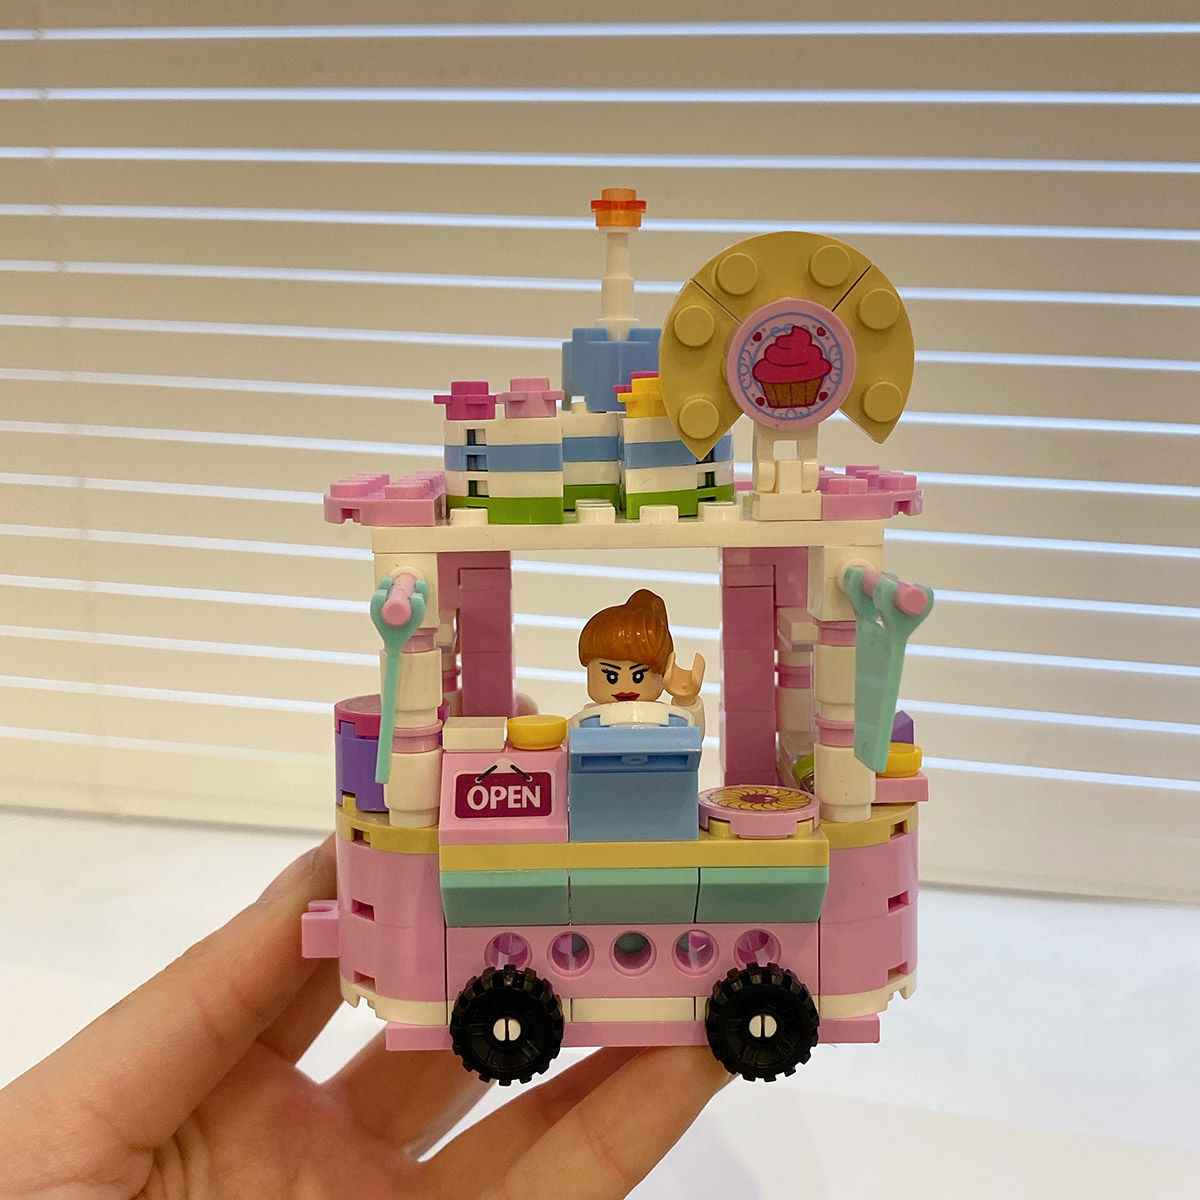 Jiaqi Girl Street View Building Blocks Compatible with Lego Desktop Decoration Toys Jaki Puzzle Assembly Girls Birthday Gifts